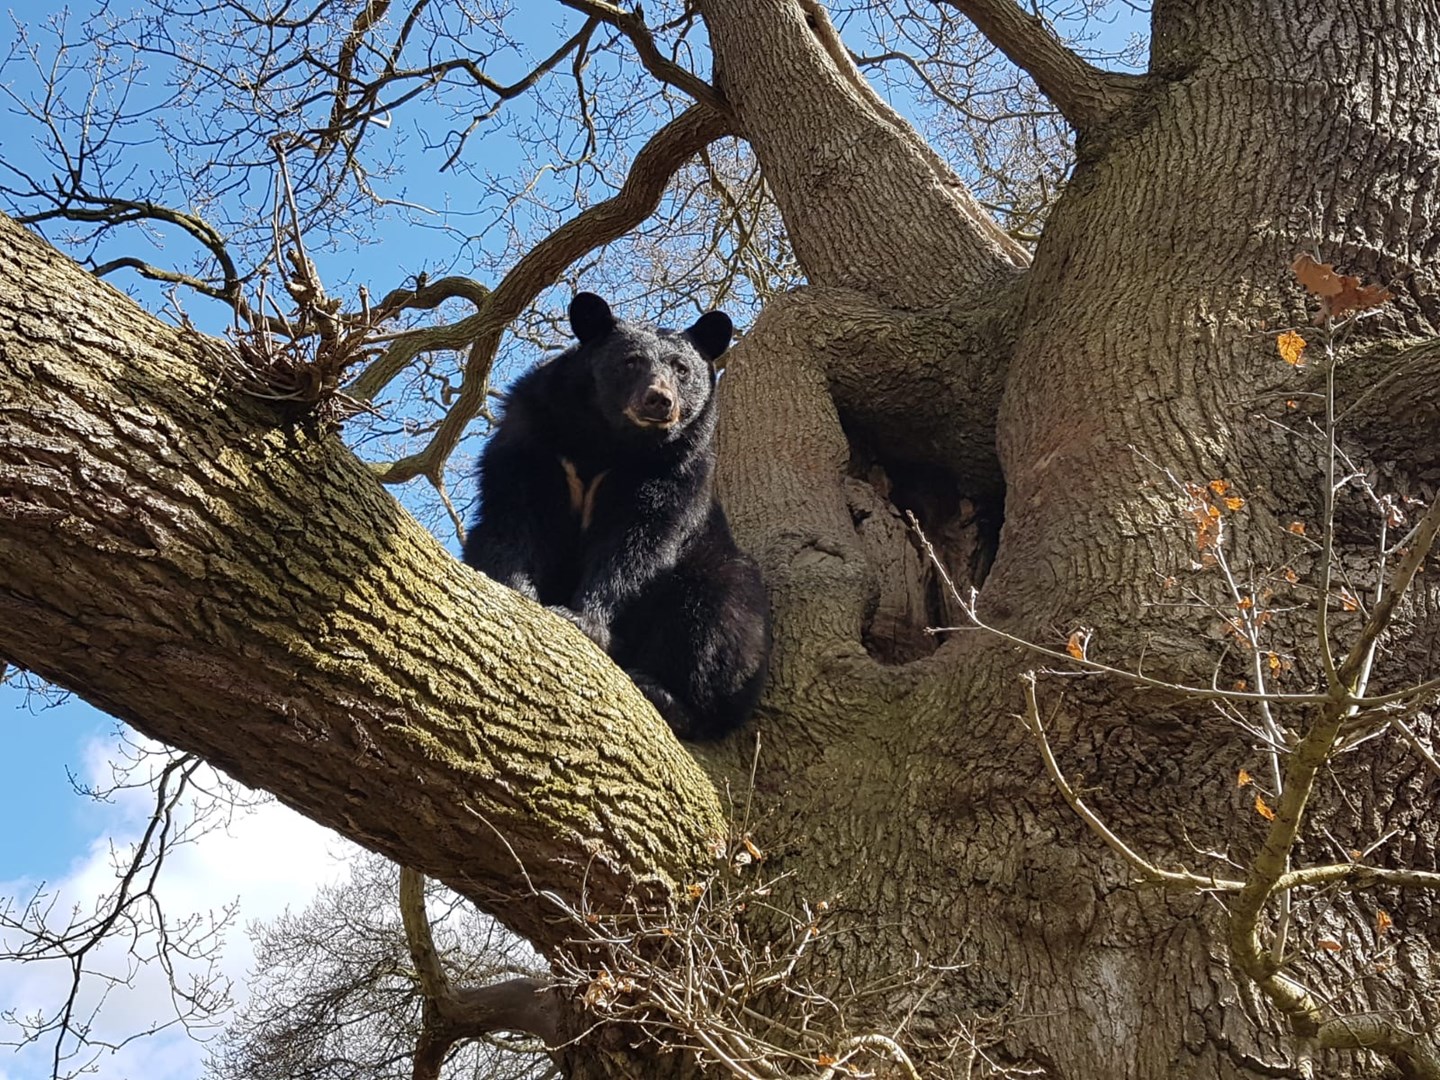 Indiana the North American black bear sits in the sun on a large tree branch at Woburn Safari Park